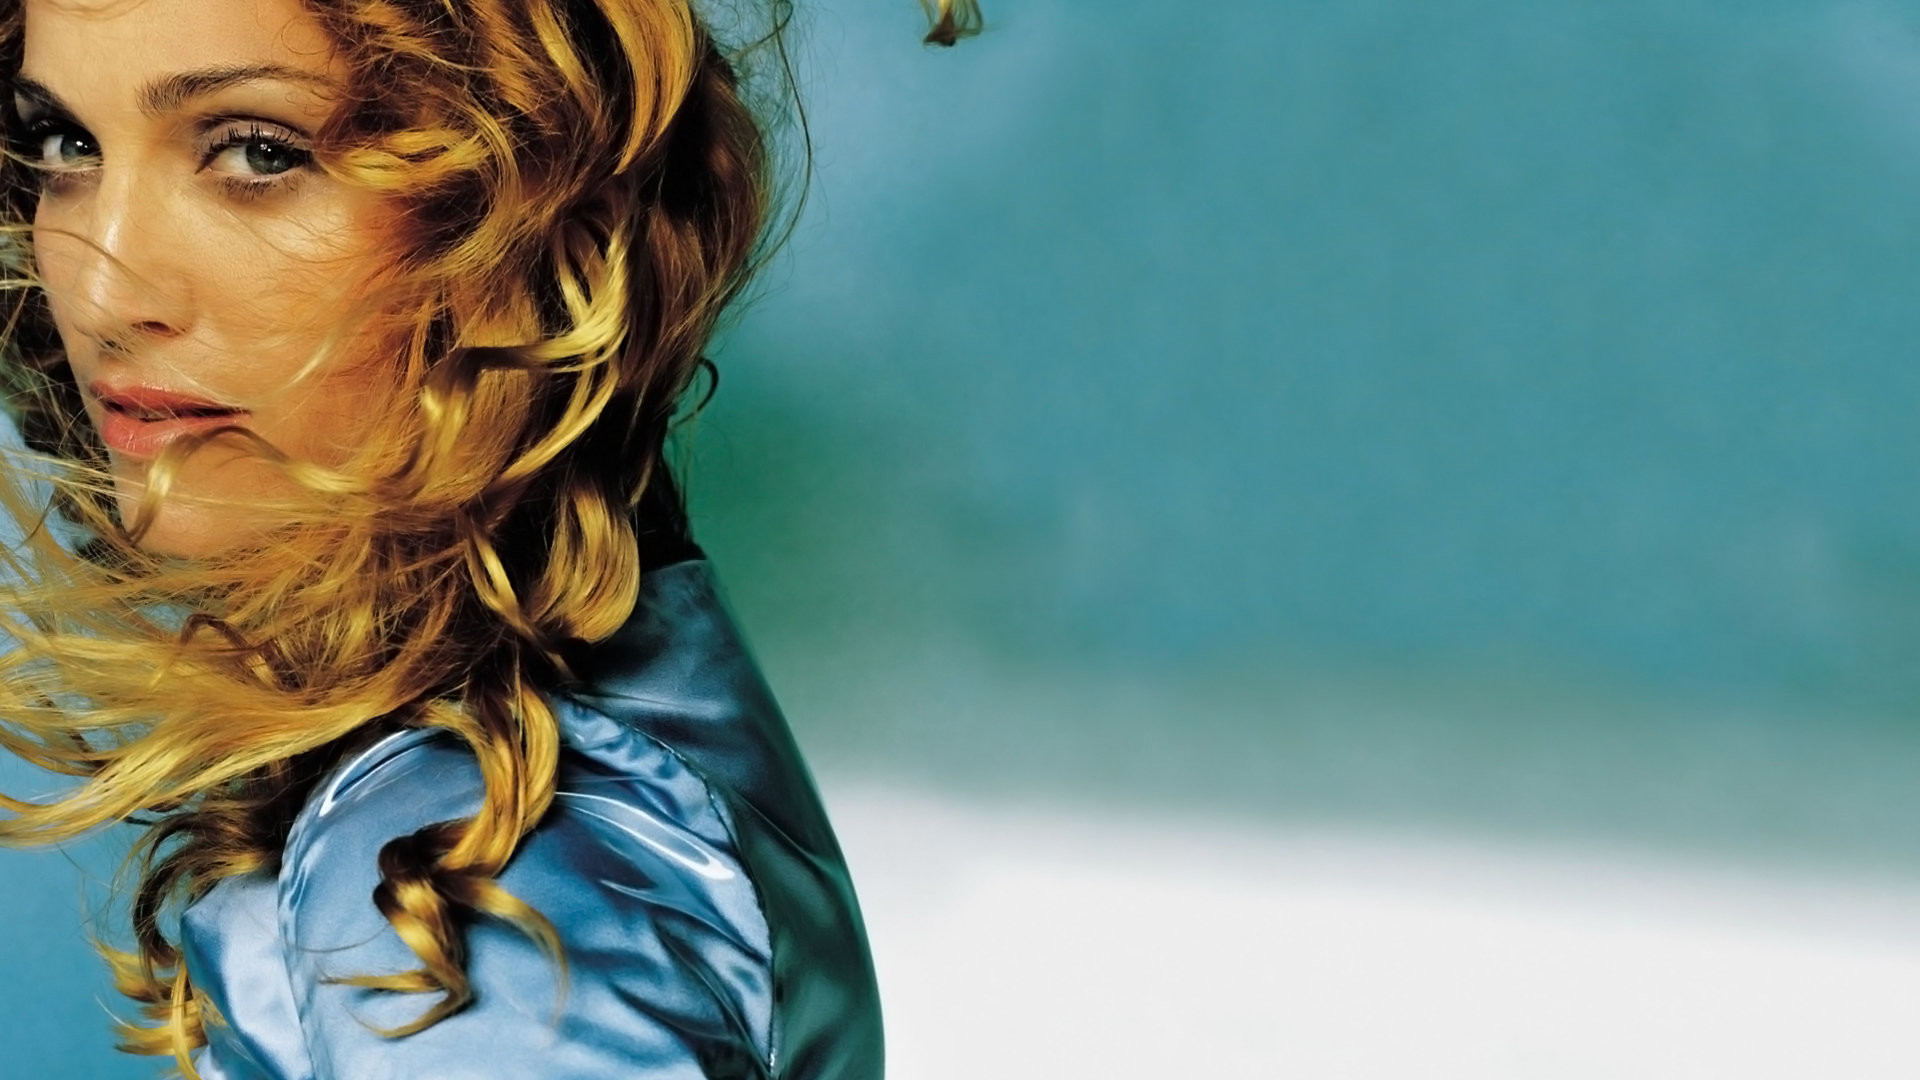 1920x1080 Madonna HD Wallpaper | Background Image |  | ID:520403 - Wallpaper  Abyss